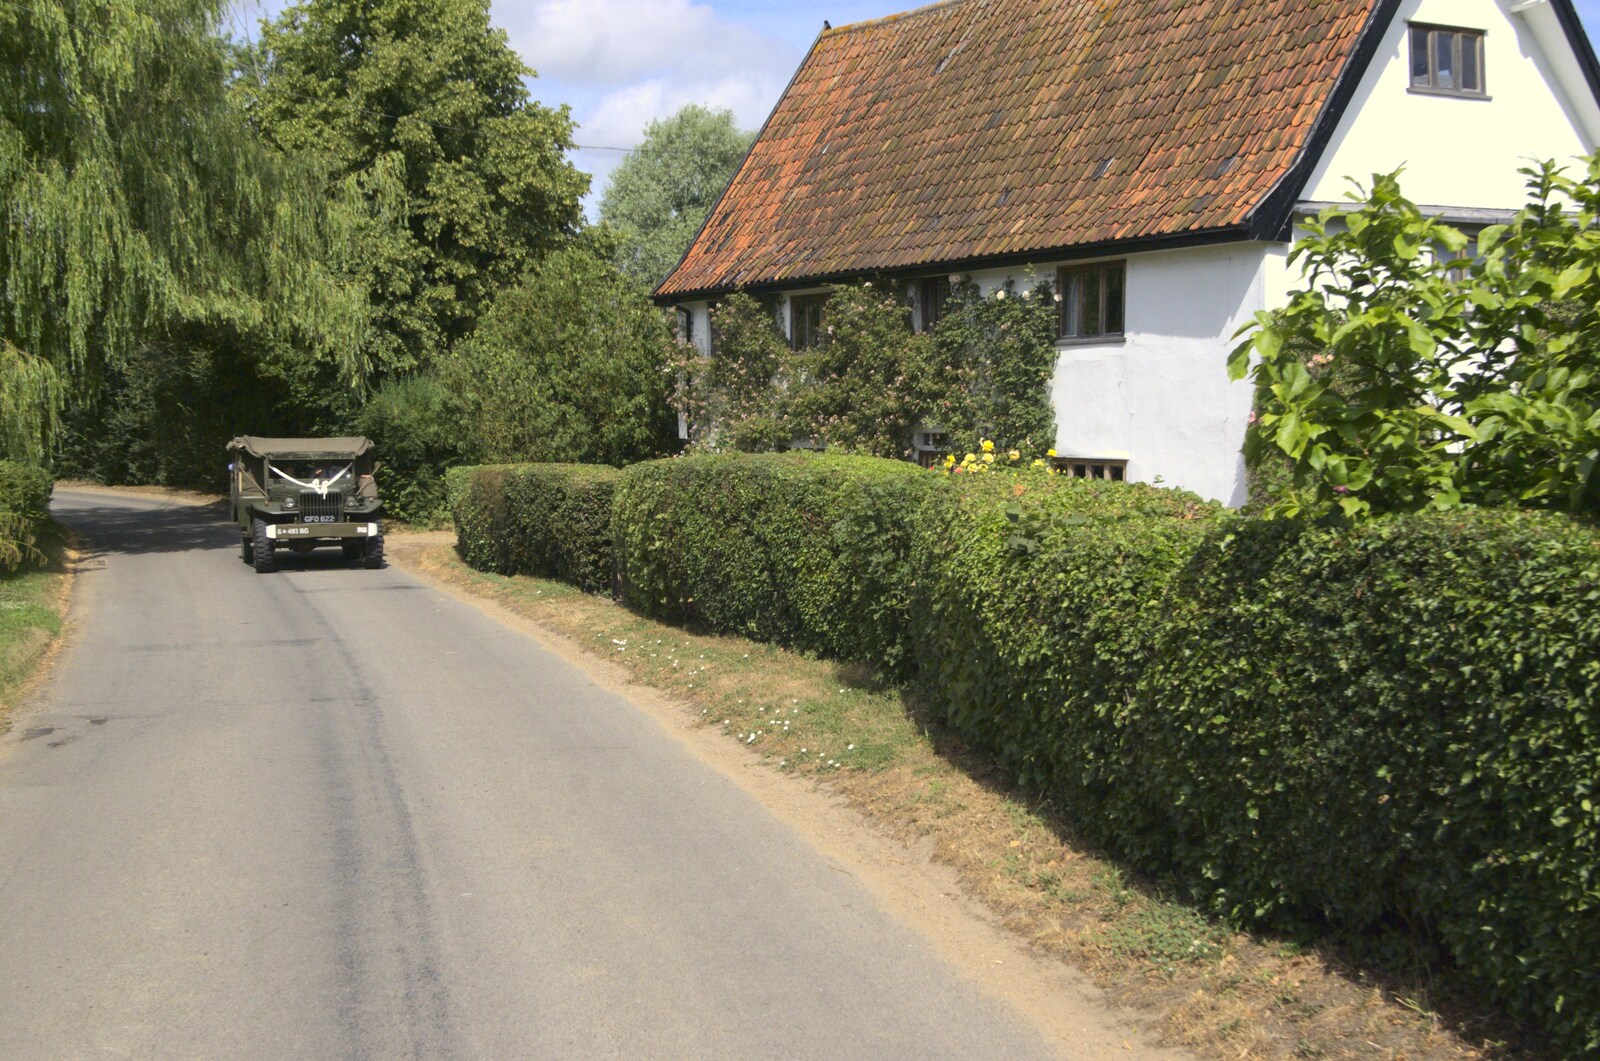 The Jeep heads past Dr. Vickery's house from Clive and Suzanne's Wedding, Oakley and Brome, Suffolk - 10th July 2010